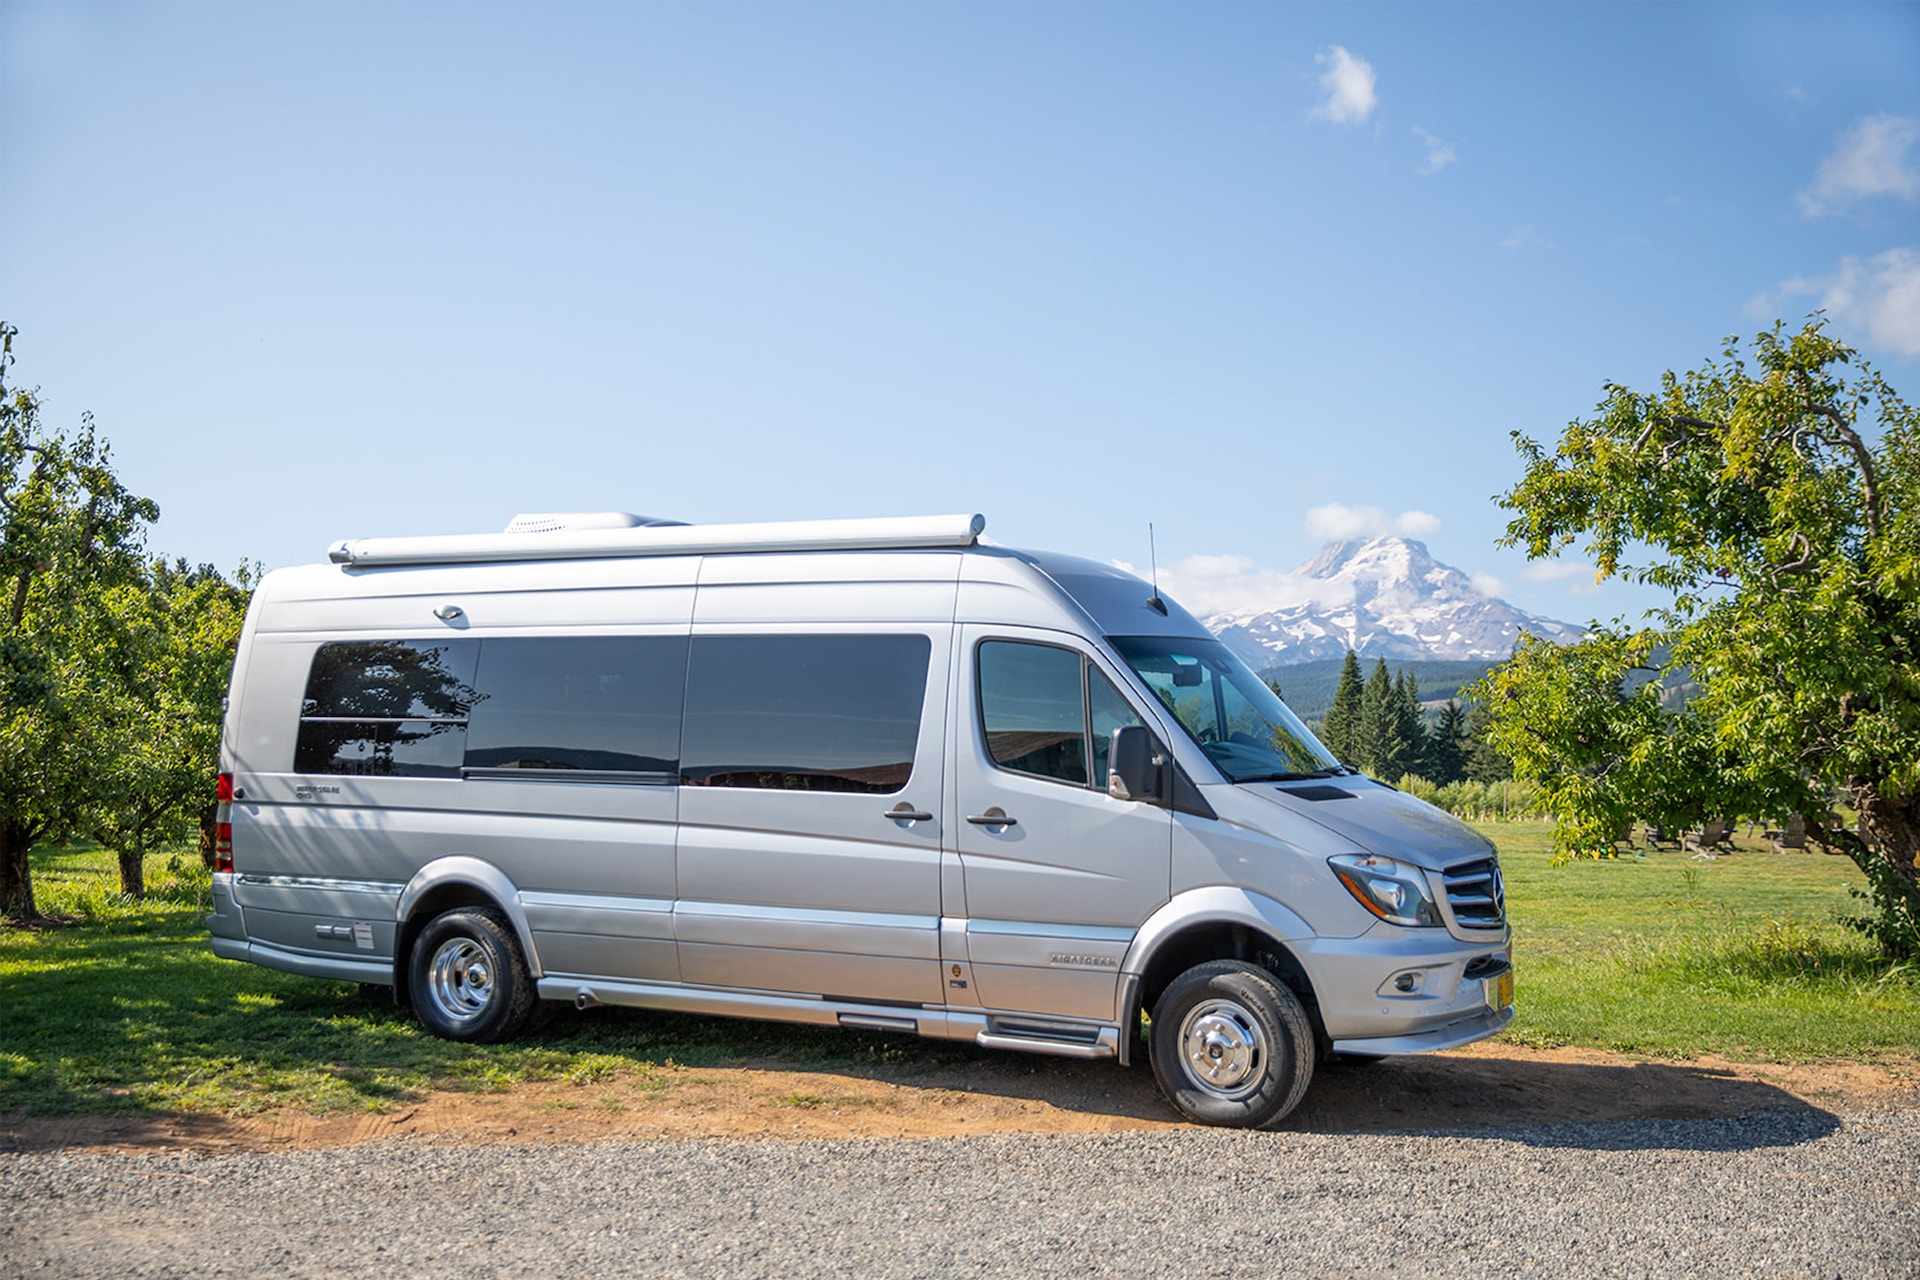 The 10 Best Campervans With a Bathroom in 2023